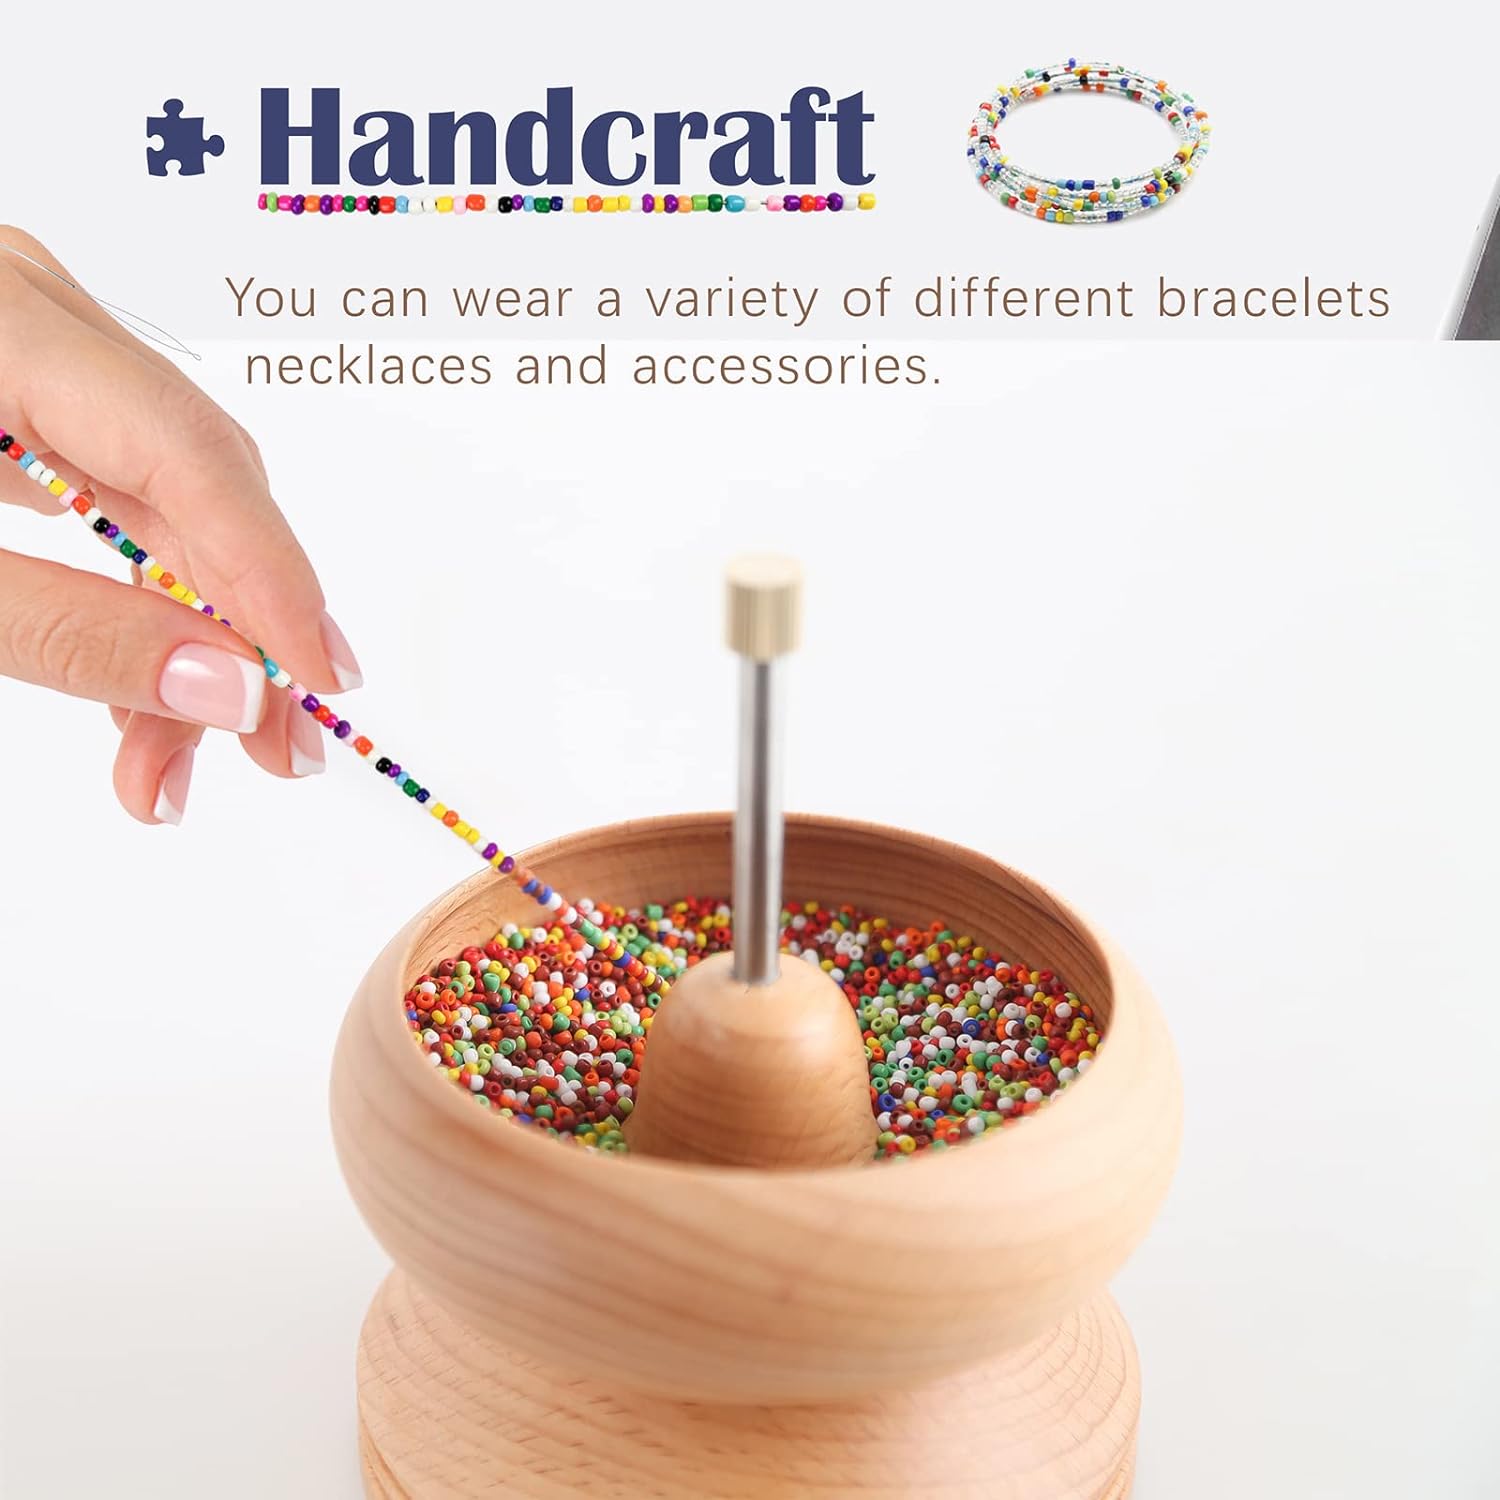 Making Clay beaded bracelets using a bead spinner